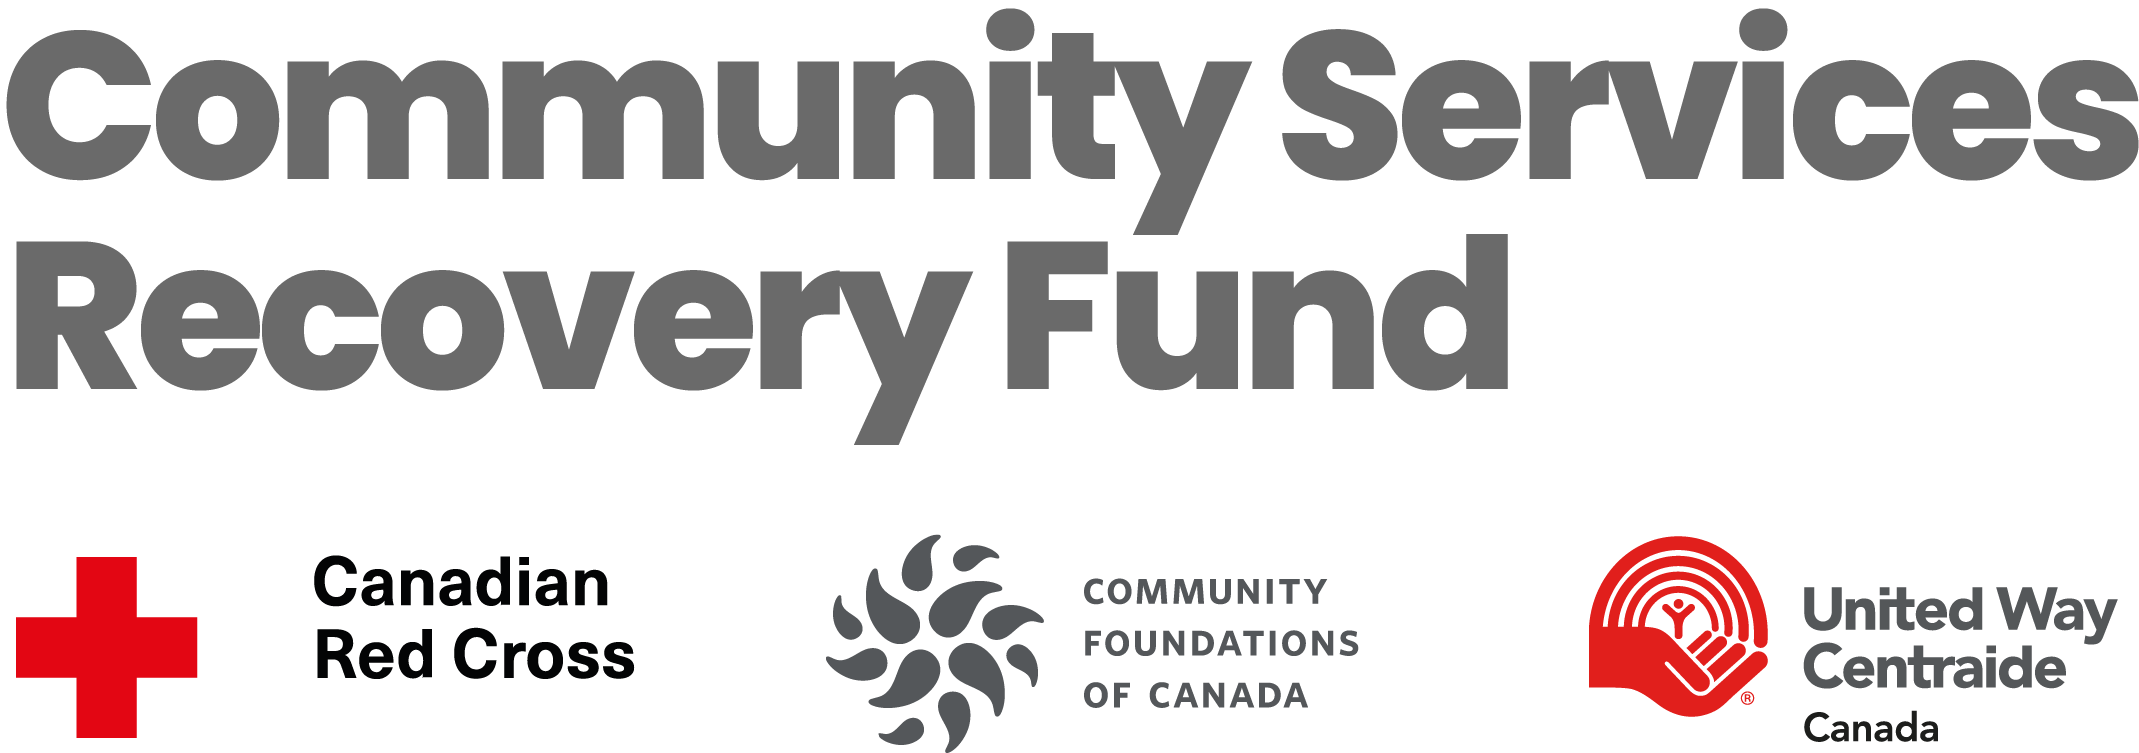 Canadian Red Cross Recovery fund logo with the Canadian red cross, Community foundations of Canada, and United way logos below